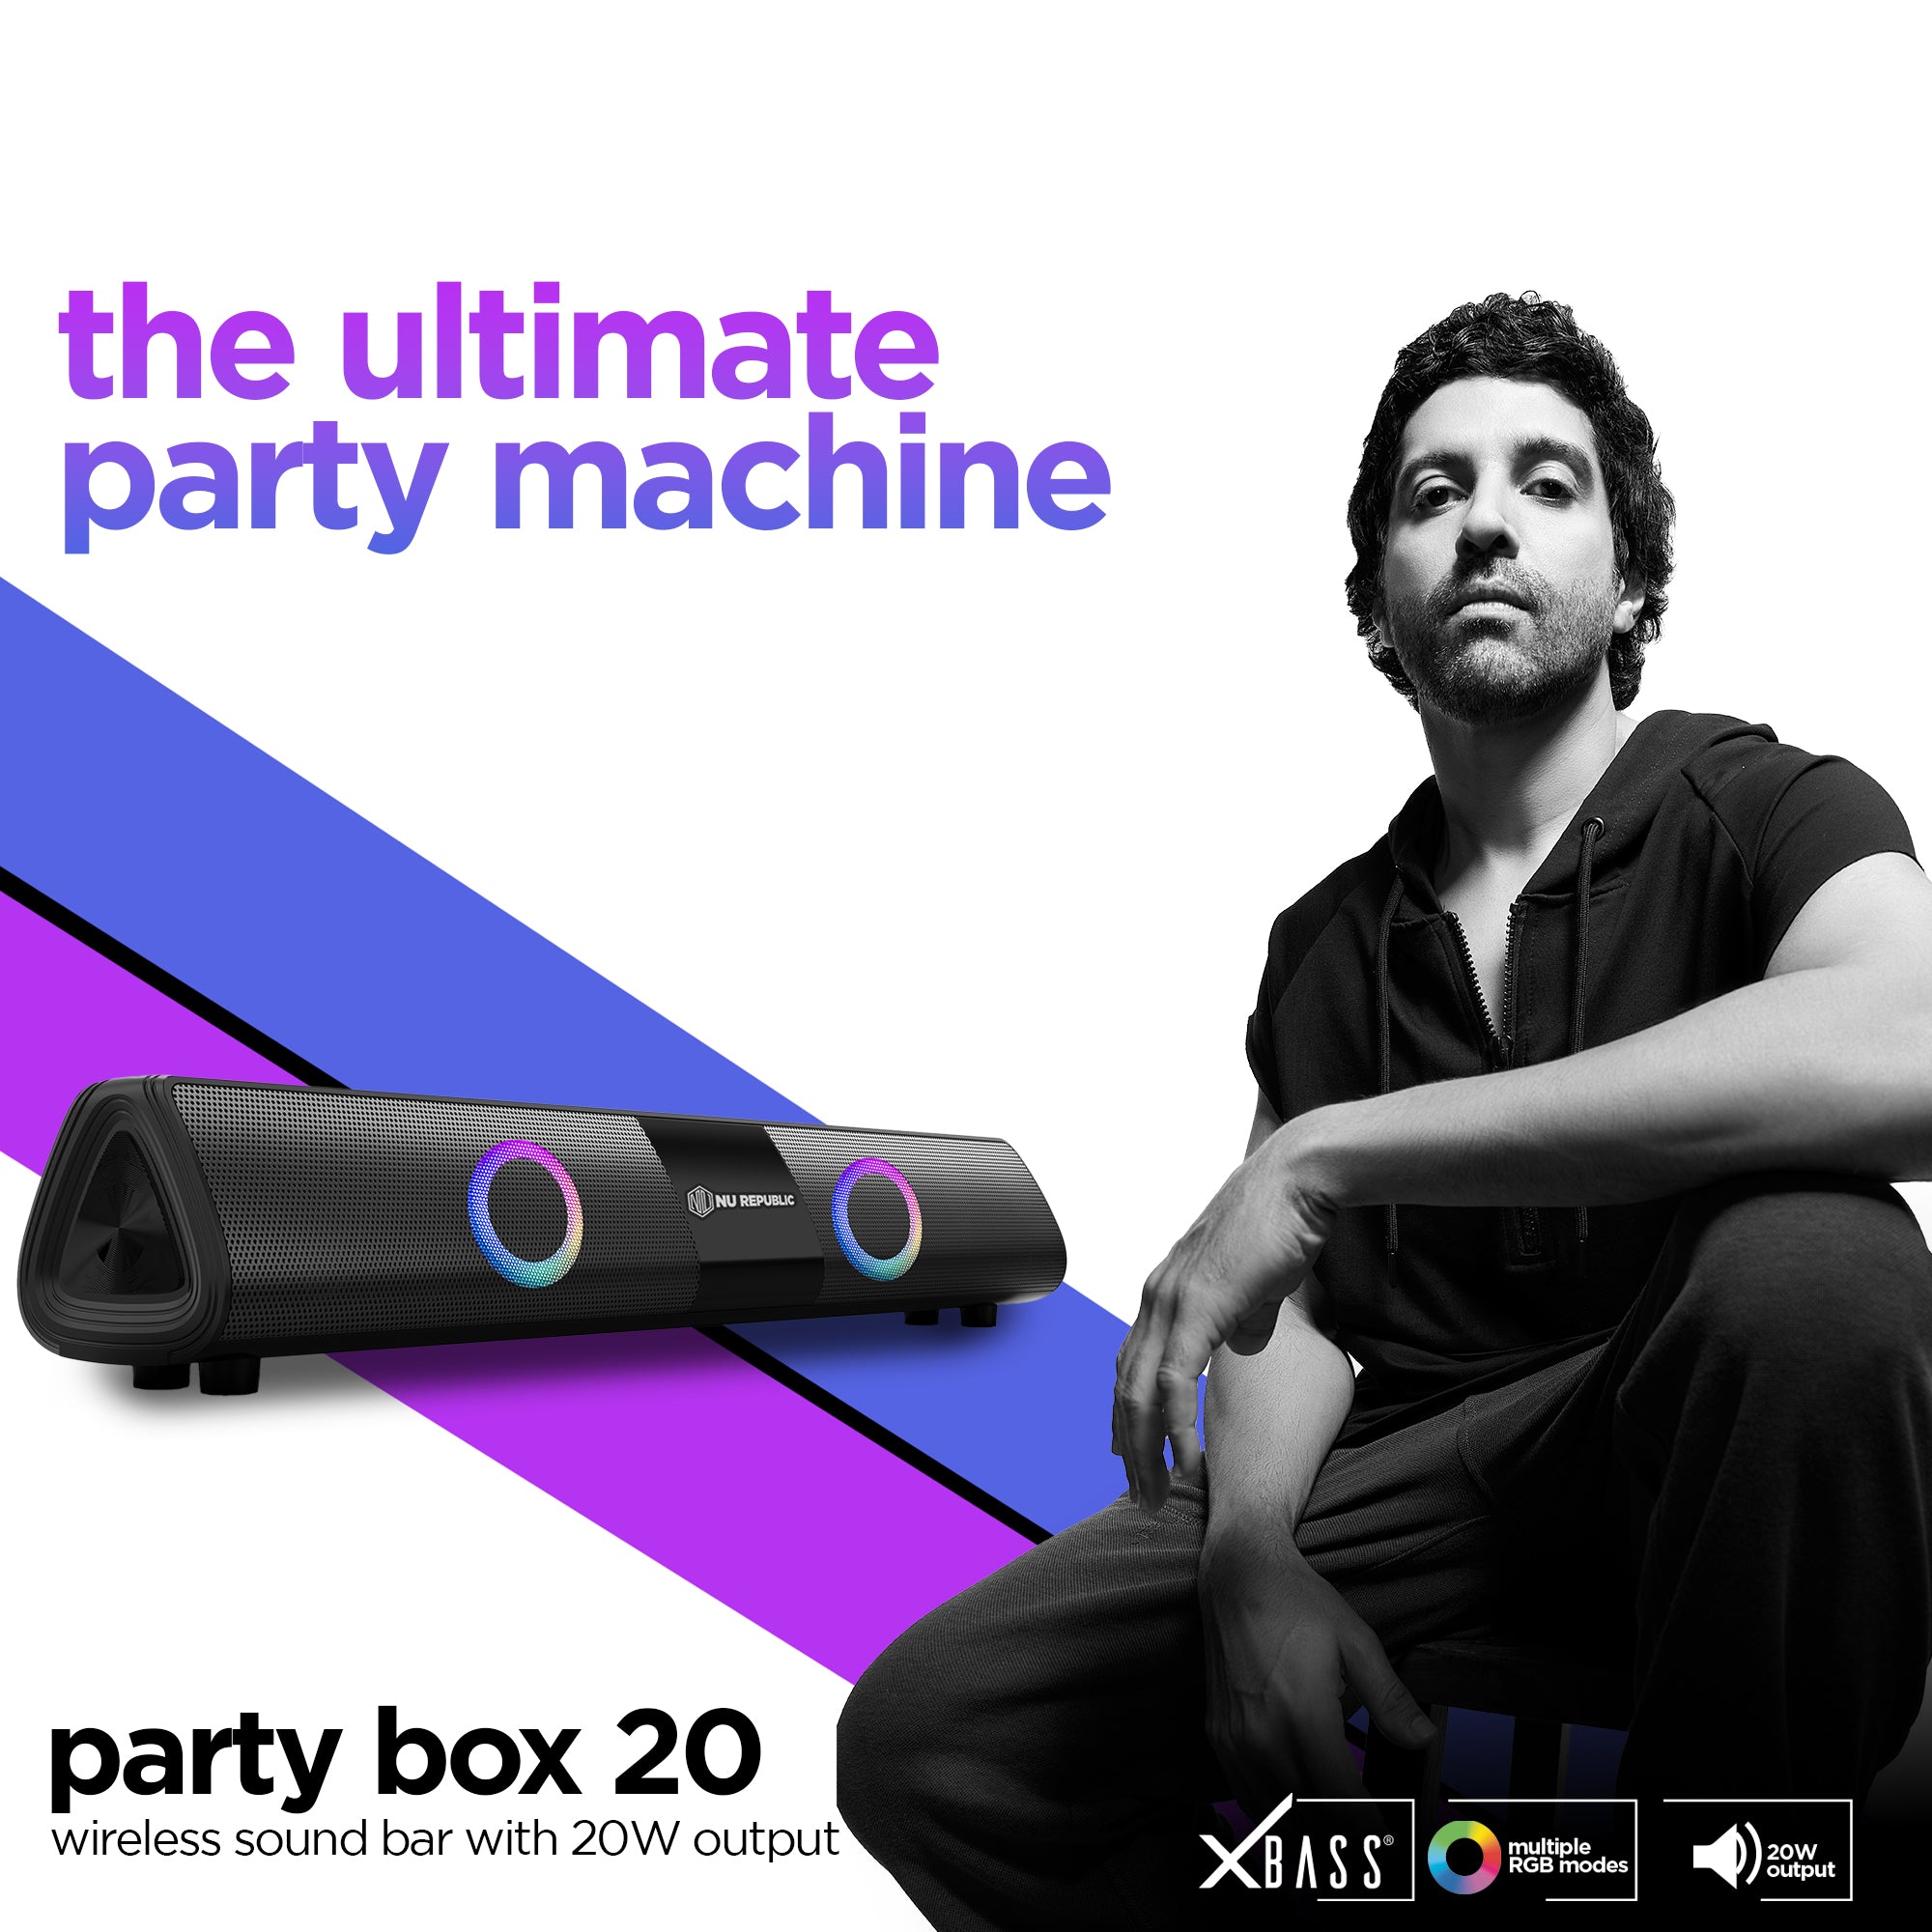 Party Box 20